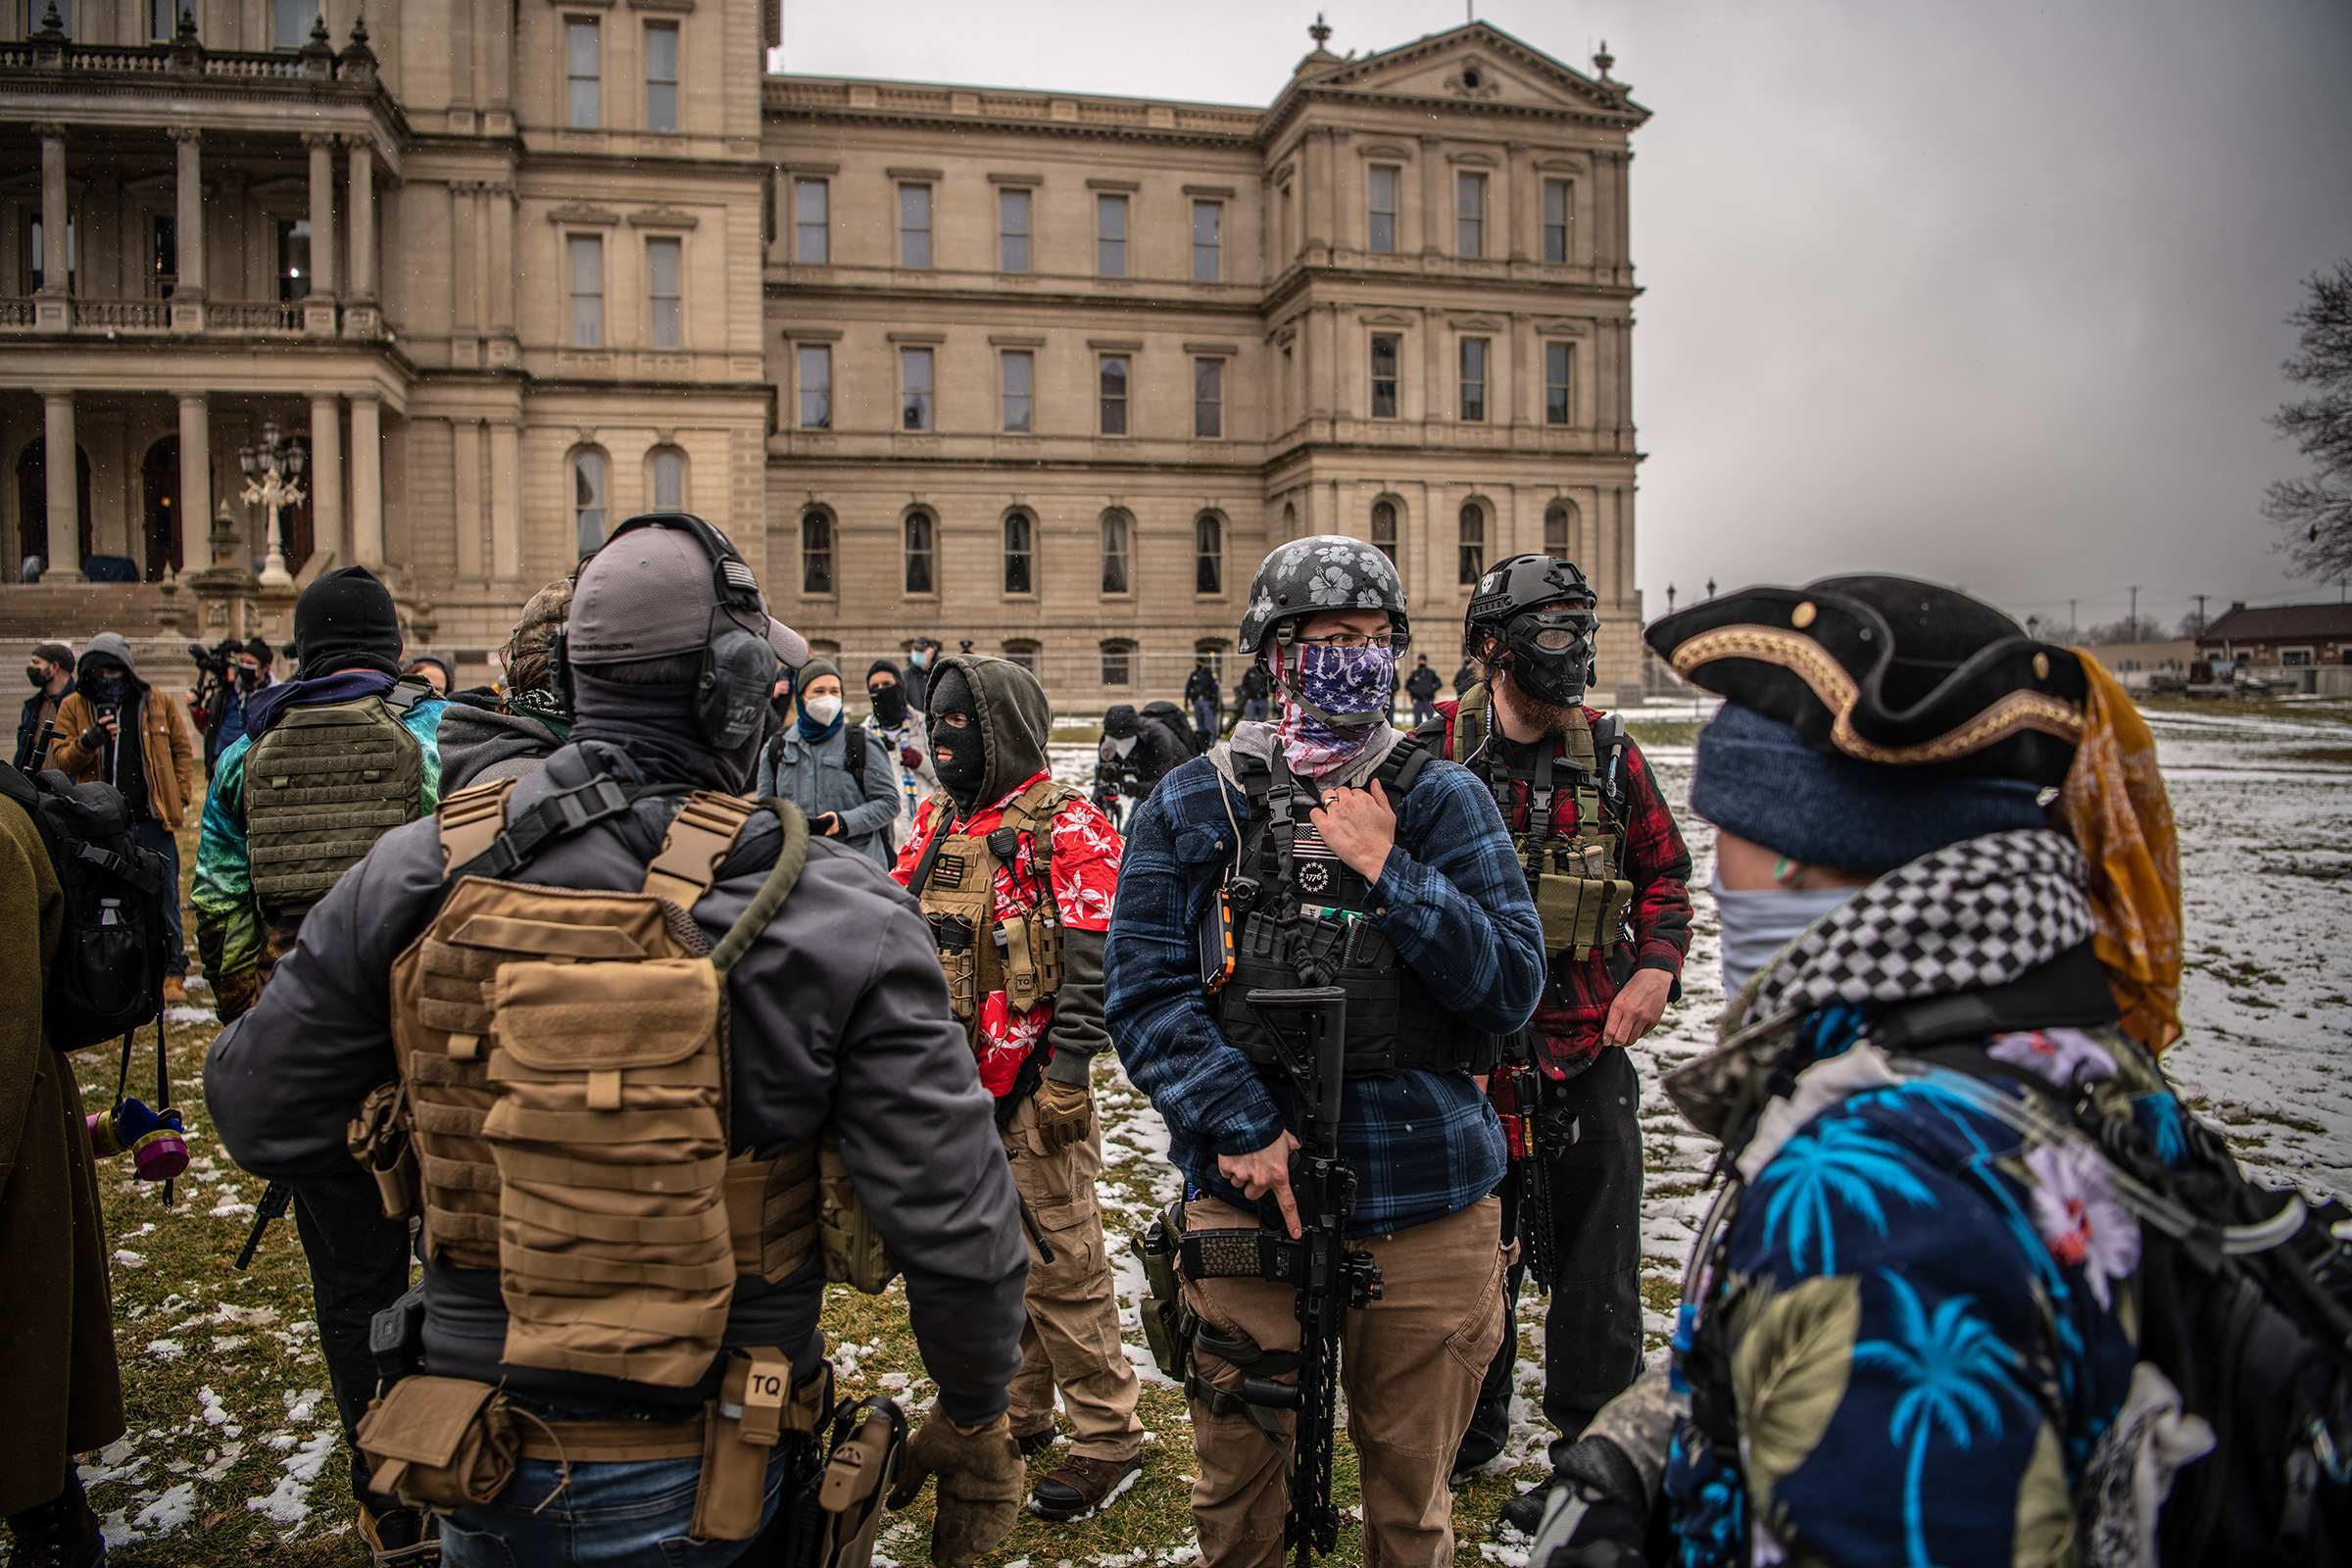 Members of the Boogaloo movement gather outside the Michigan state capitol in Lansing on Jan. 17 (Bryan Denton—The New York Times/Redux)